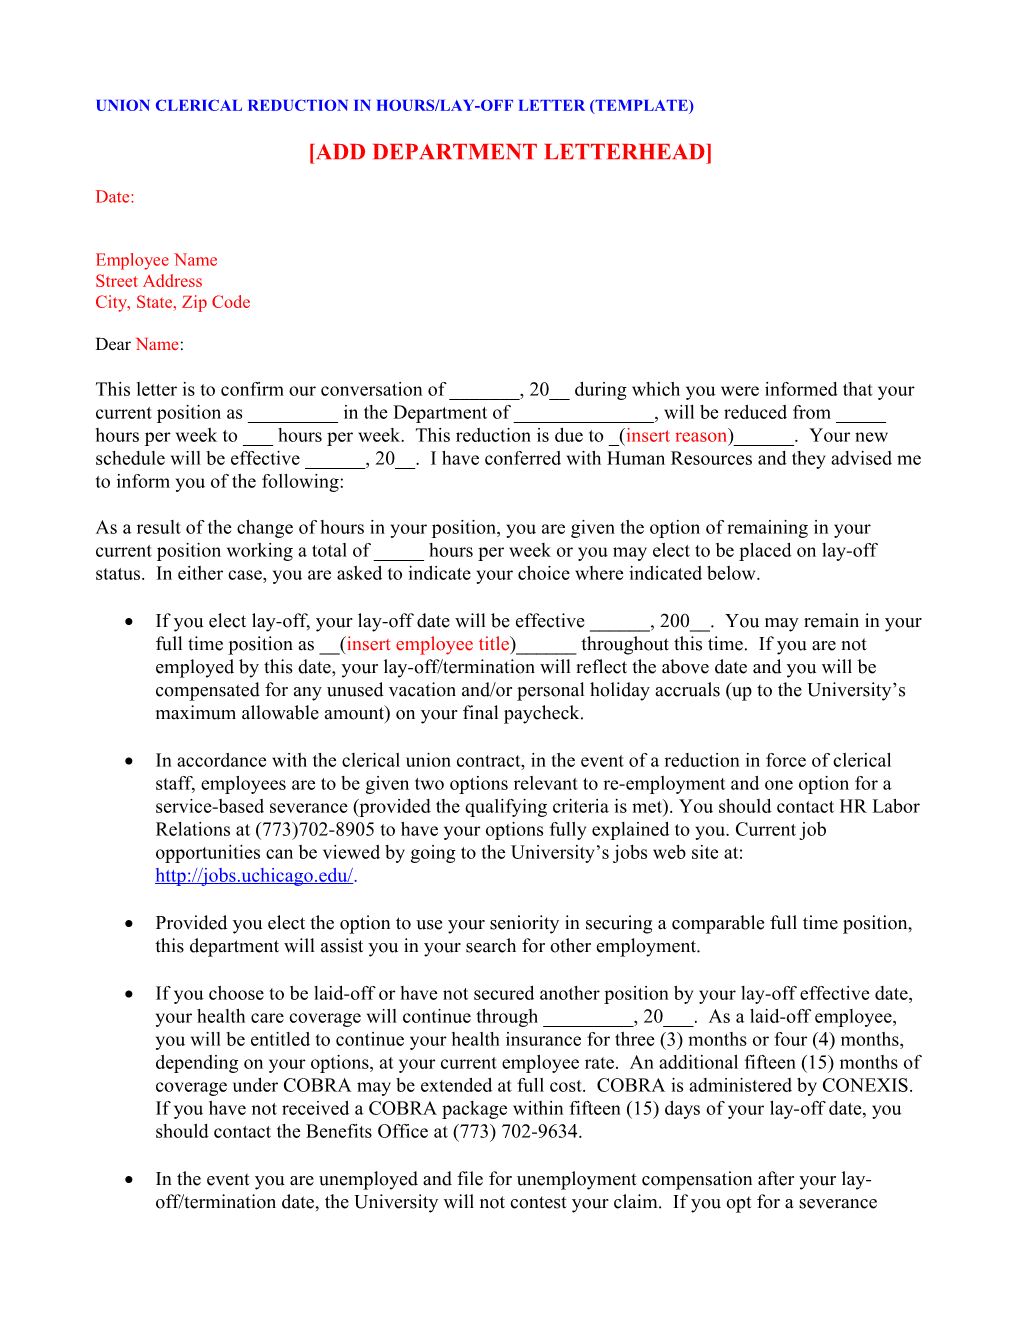 Union Clerical Lay-Off Letter (Template)